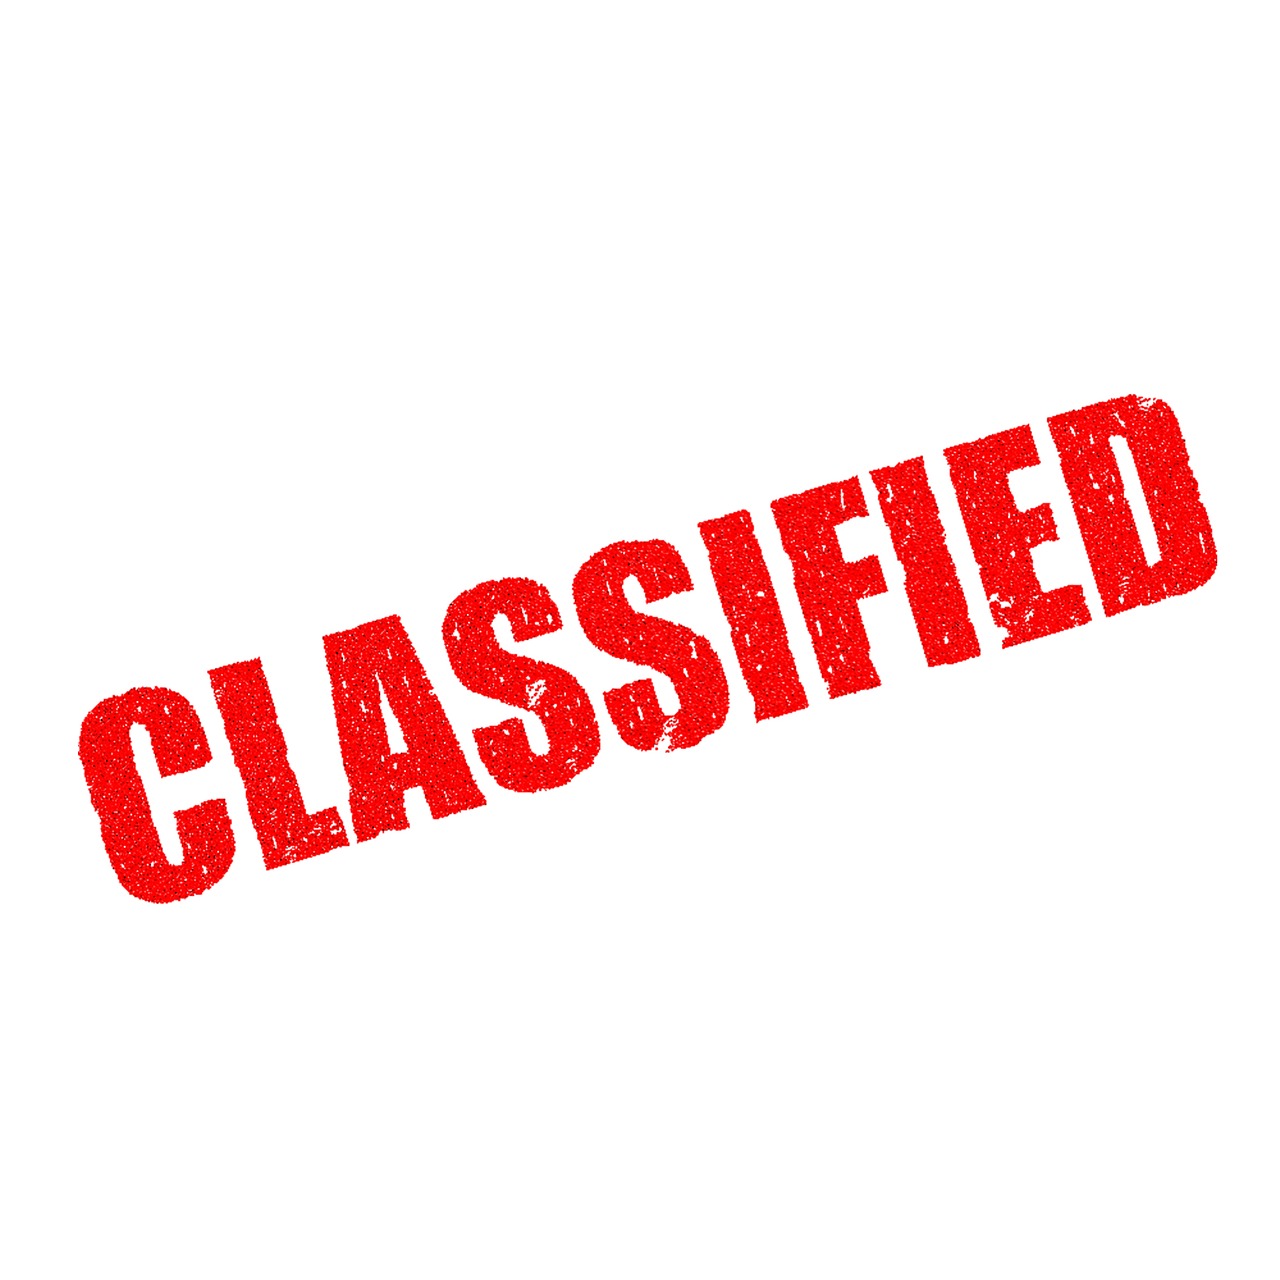 Download Free Photo Of Top Secret Classified Confidential Secrecy Private From Needpix Com